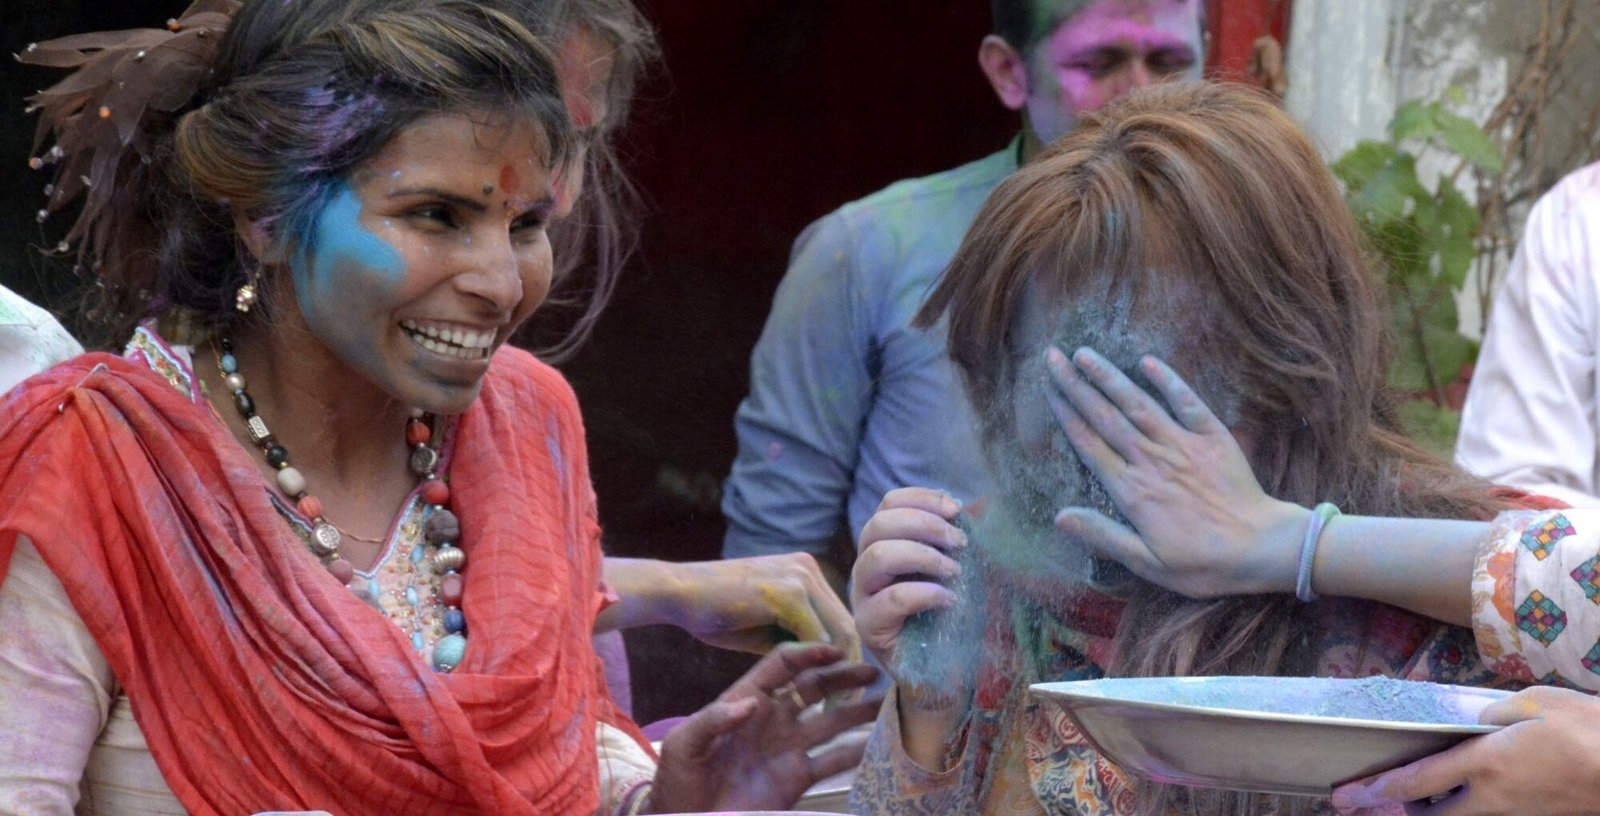 A Pakistani Hindu scatters color powder on a woman's face